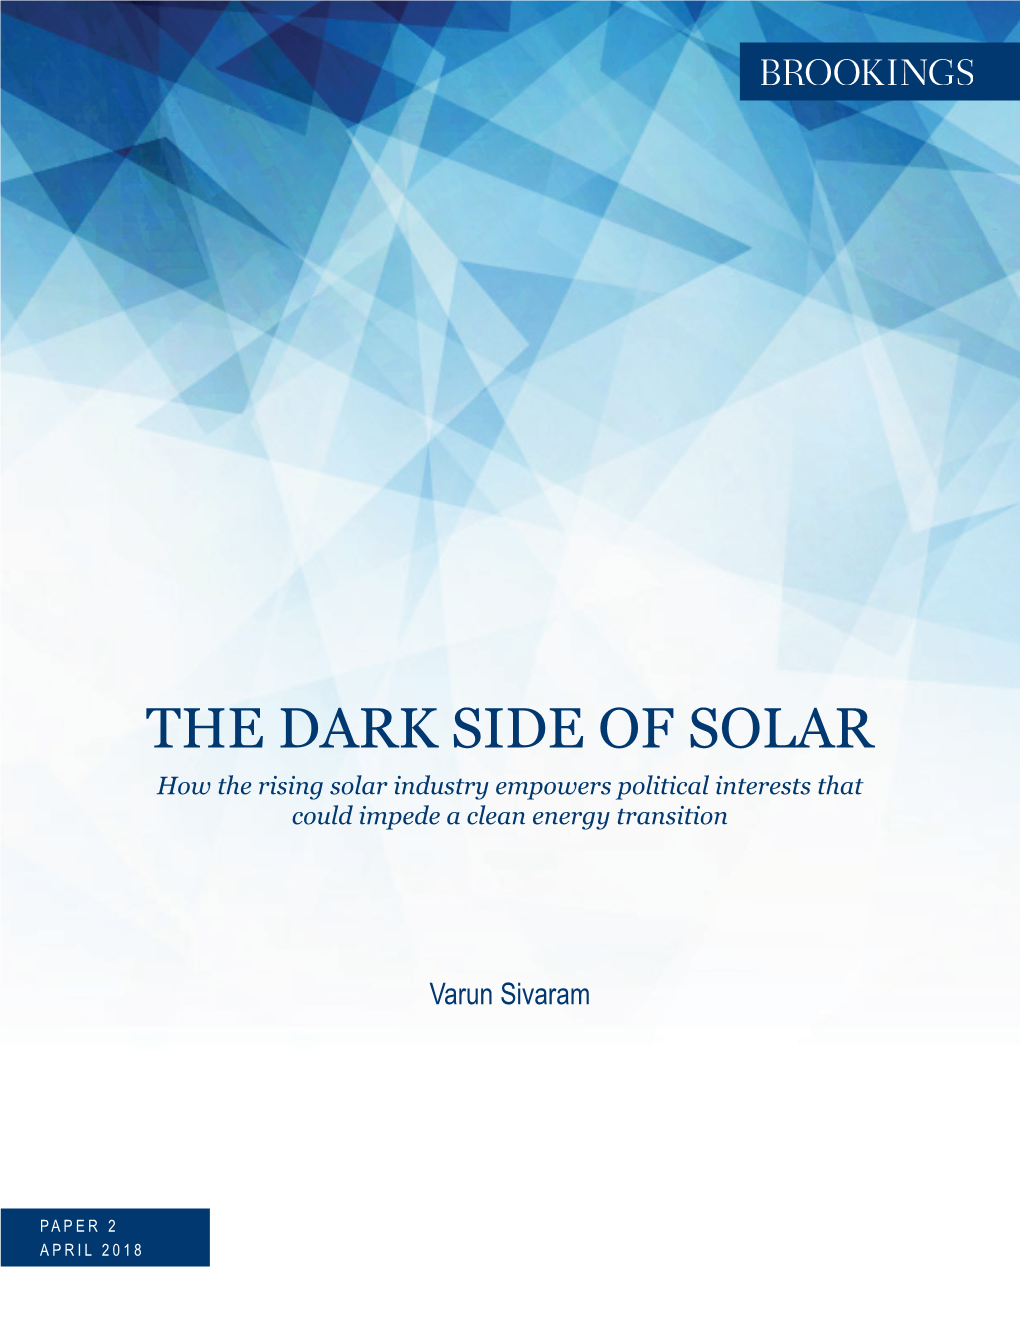 THE DARK SIDE of SOLAR How the Rising Solar Industry Empowers Political Interests That Could Impede a Clean Energy Transition